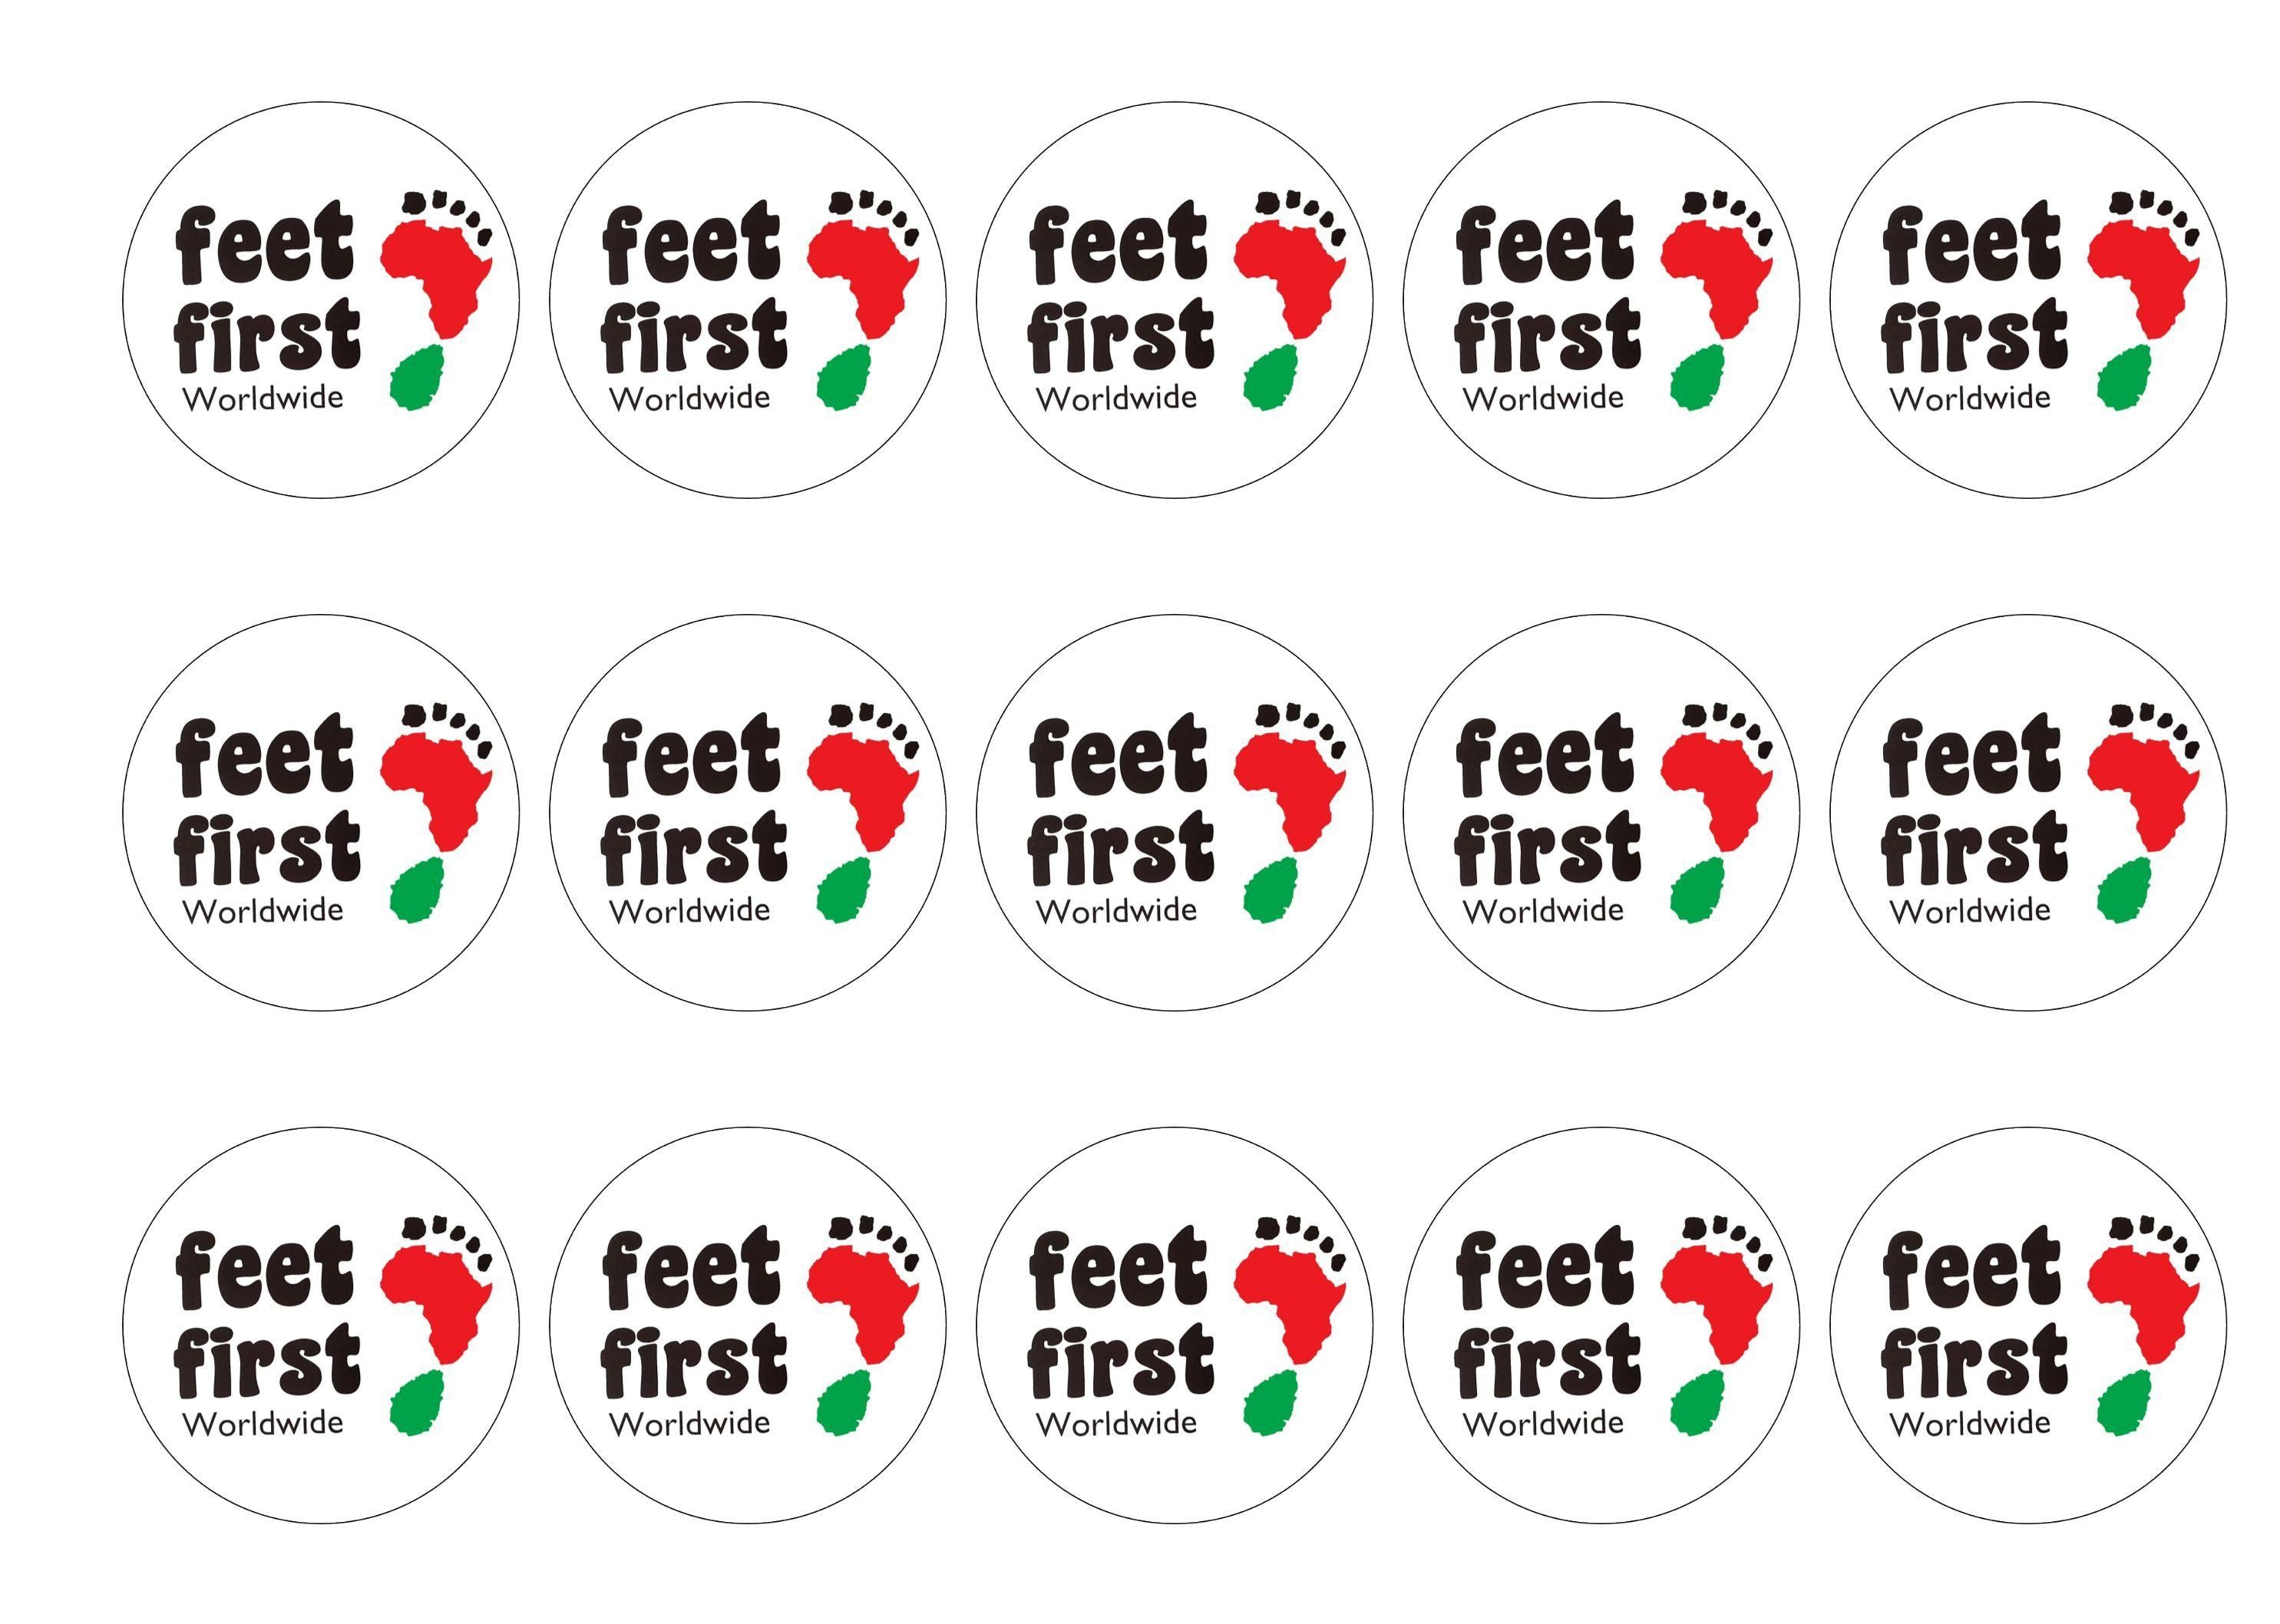 Printed edible charity cupcake and cake toppers for Feet First Worldwide